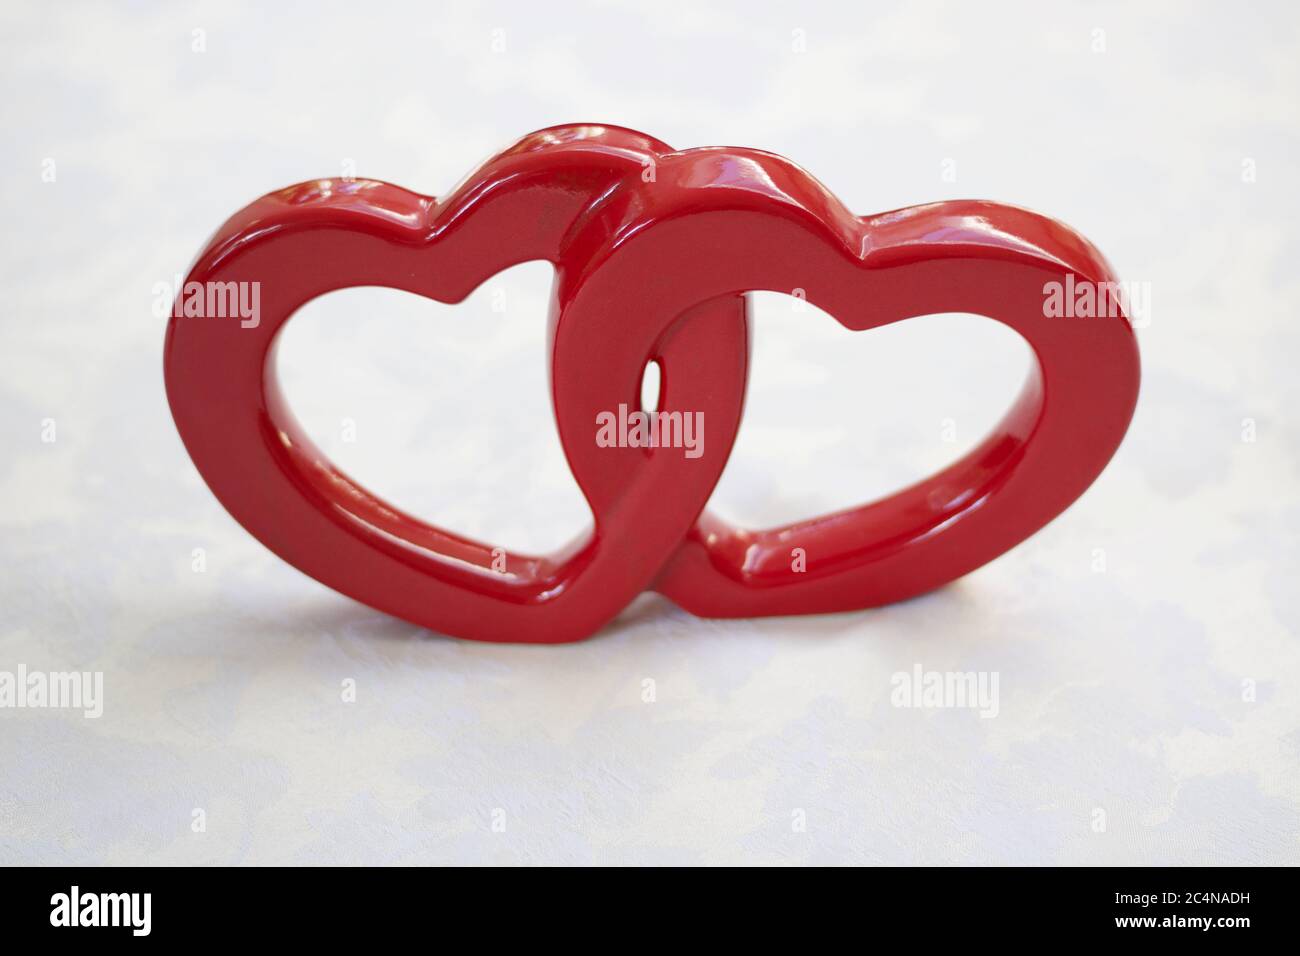 Two interconnected red ceramic hearts on white background with copyspace Stock Photo